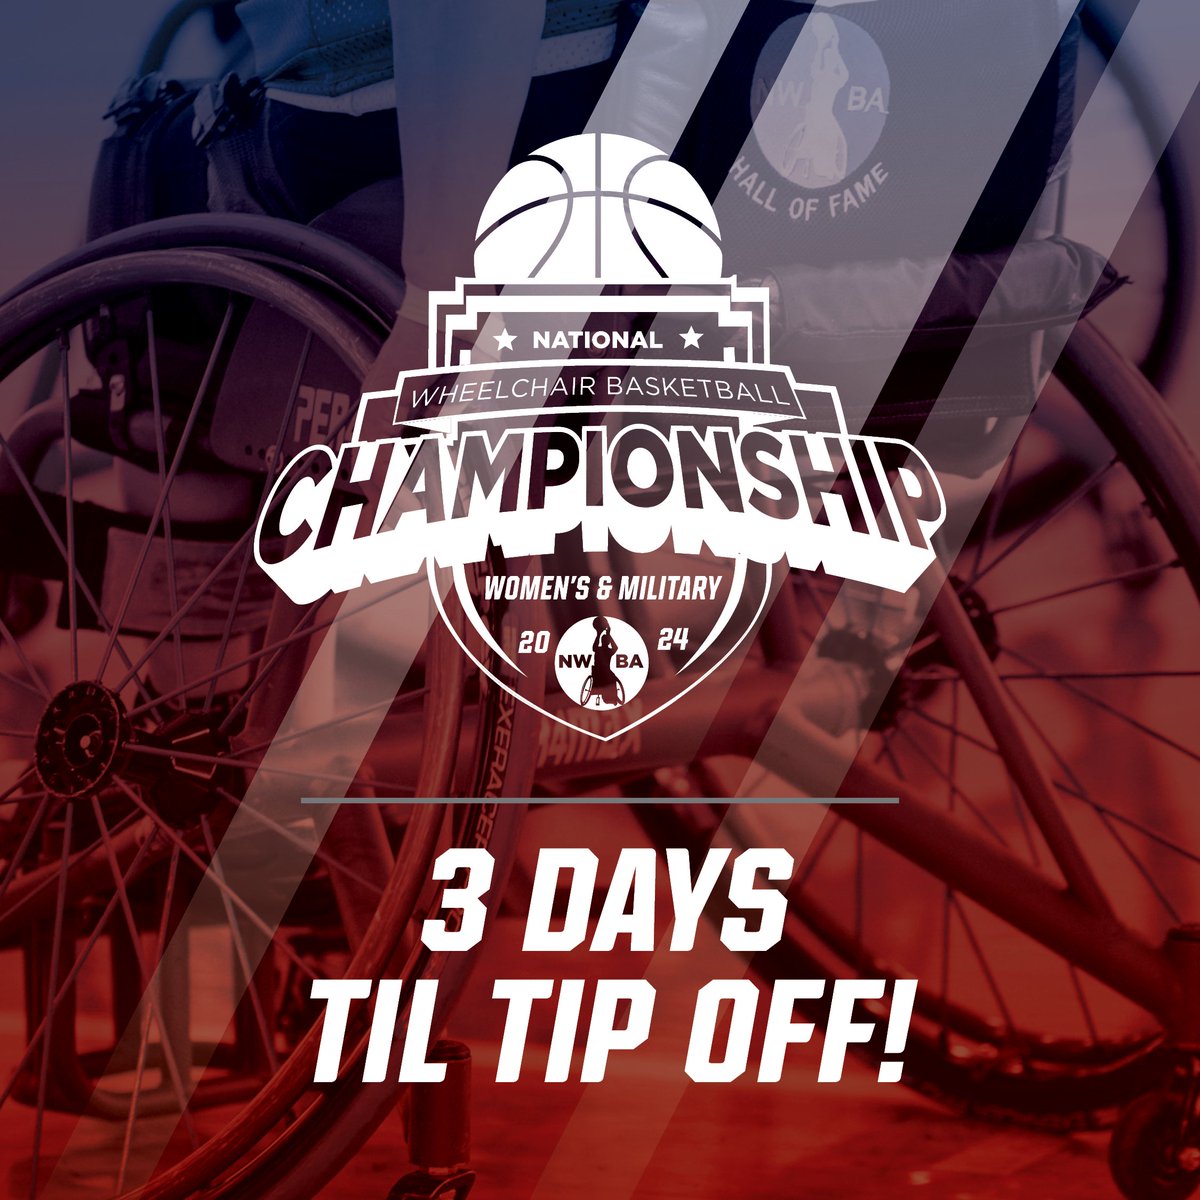 We are just three days away from the NWBA Women's and Military Championship! Get your tickets today before the online pre-sale closes at midnight! Volunteers are also still needed during this action-packed weekend! Learn more: bit.ly/3vH3EYG